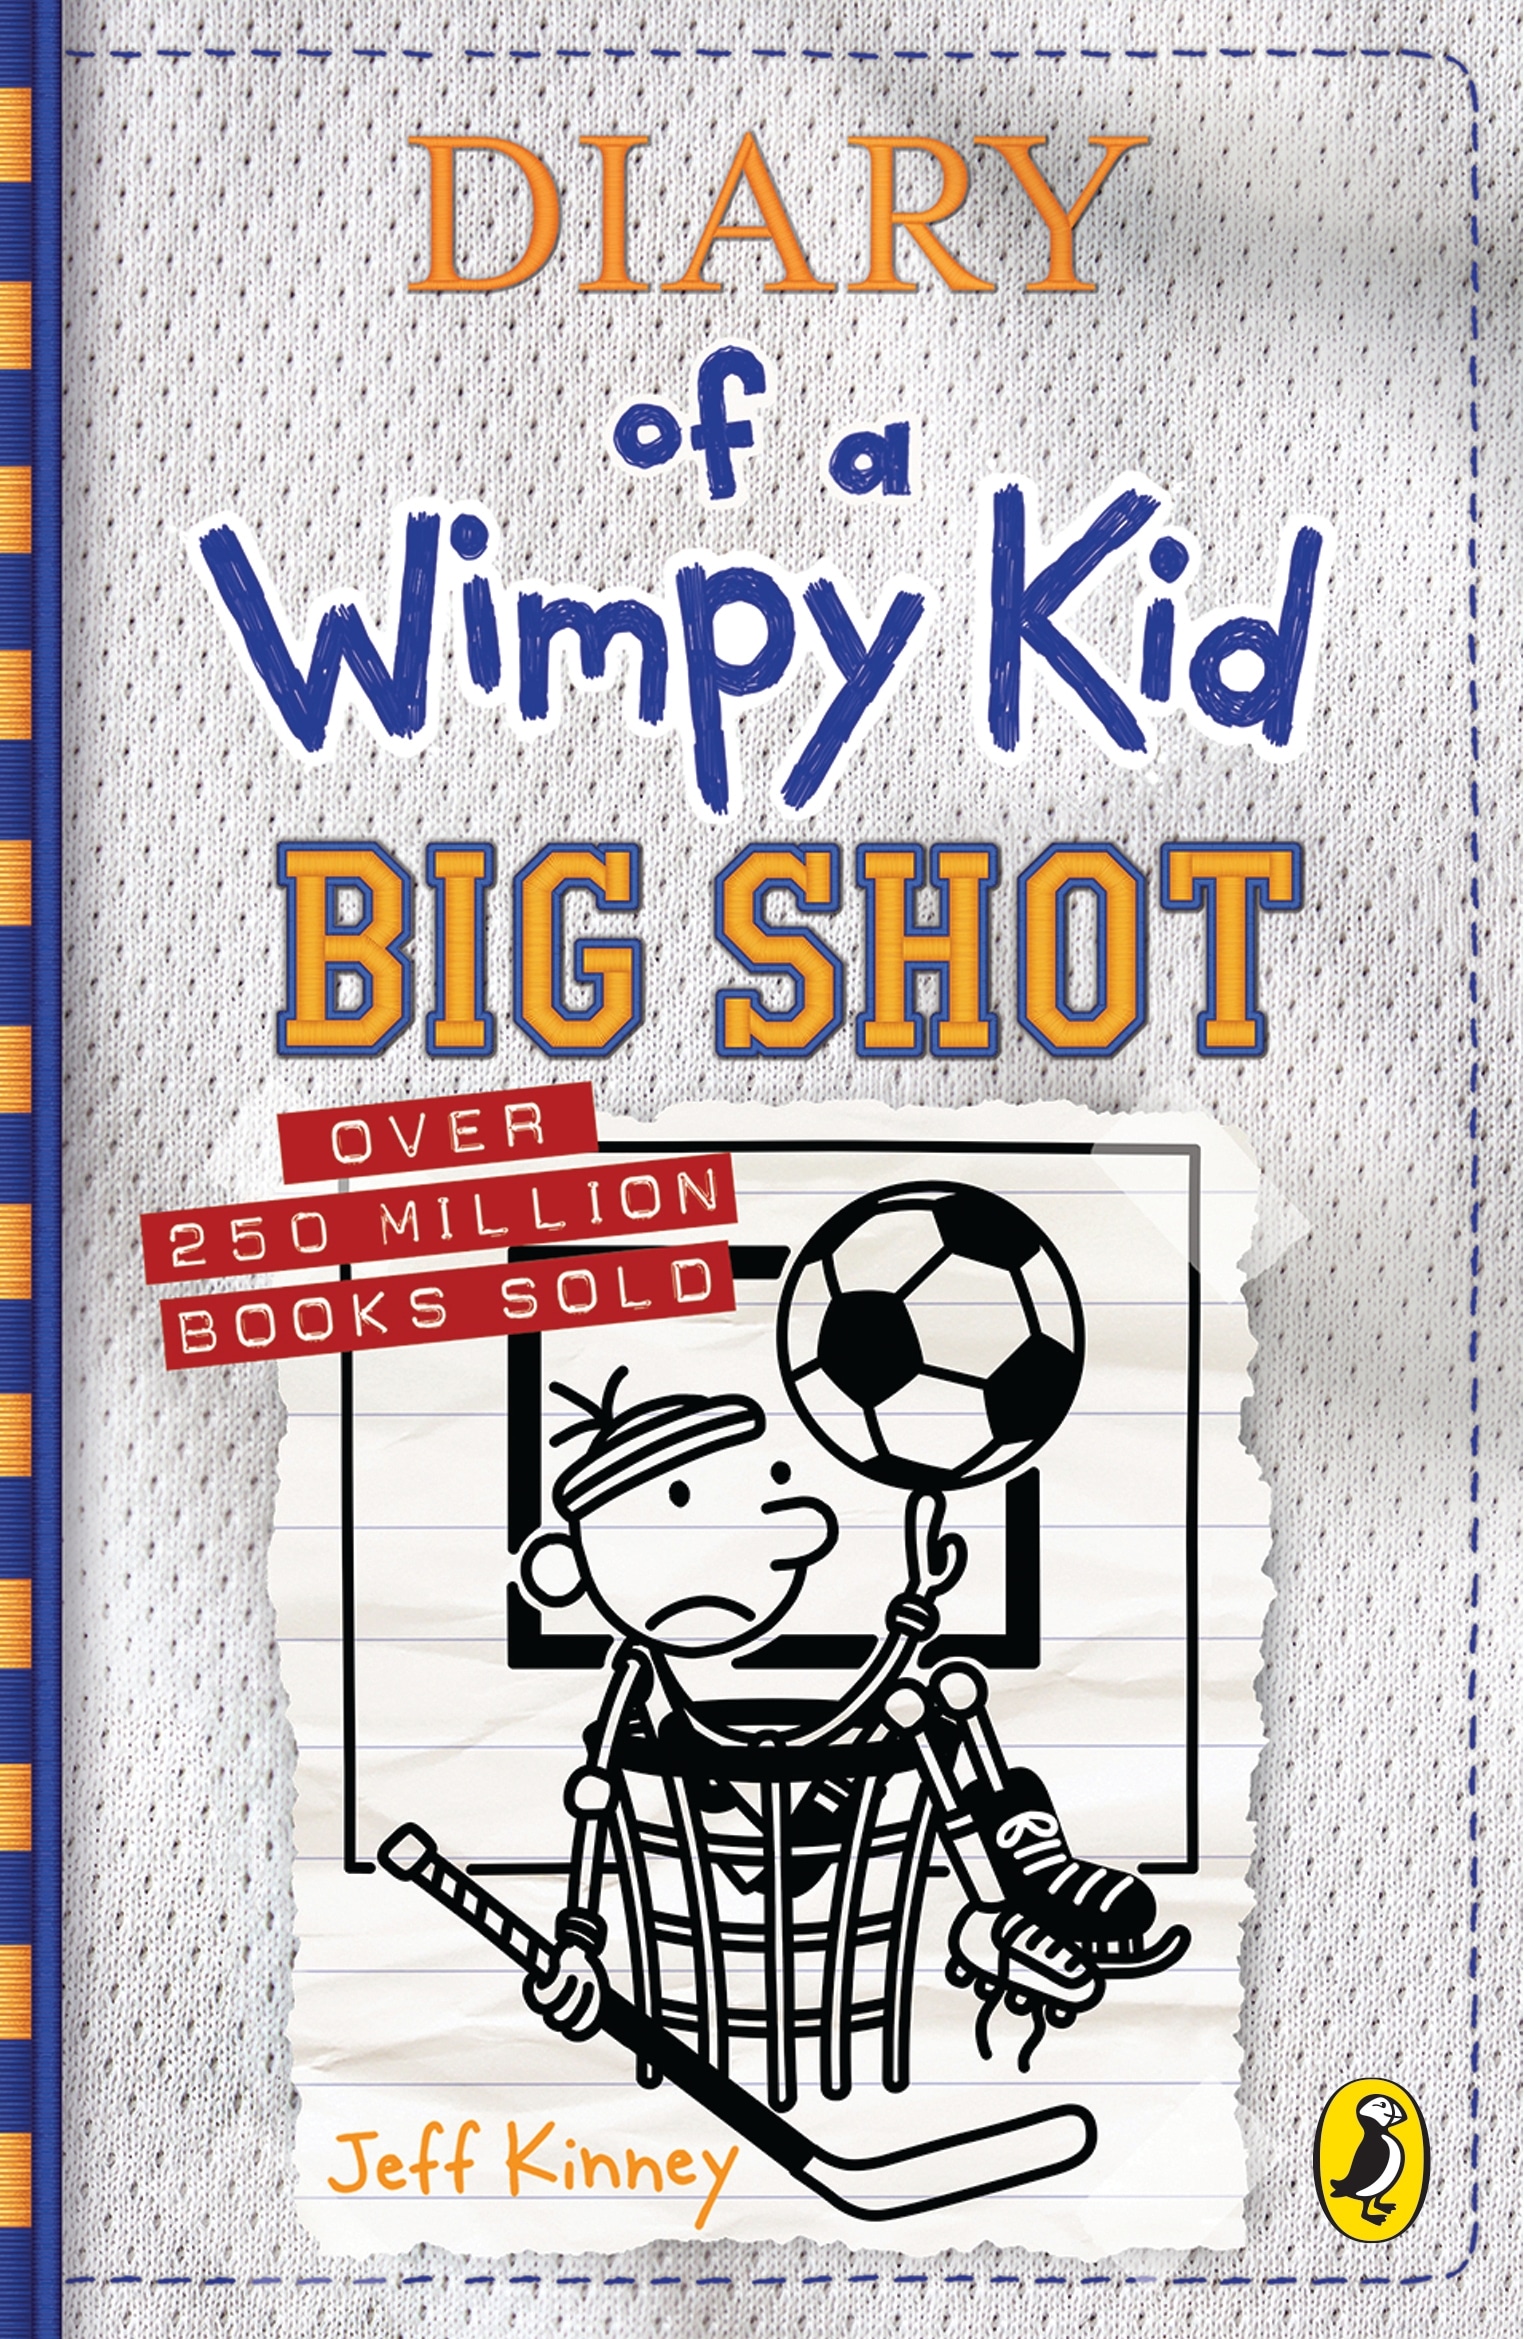 Book “Diary of a Wimpy Kid: Big Shot (Book 16)” by Jeff Kinney — January 26, 2023